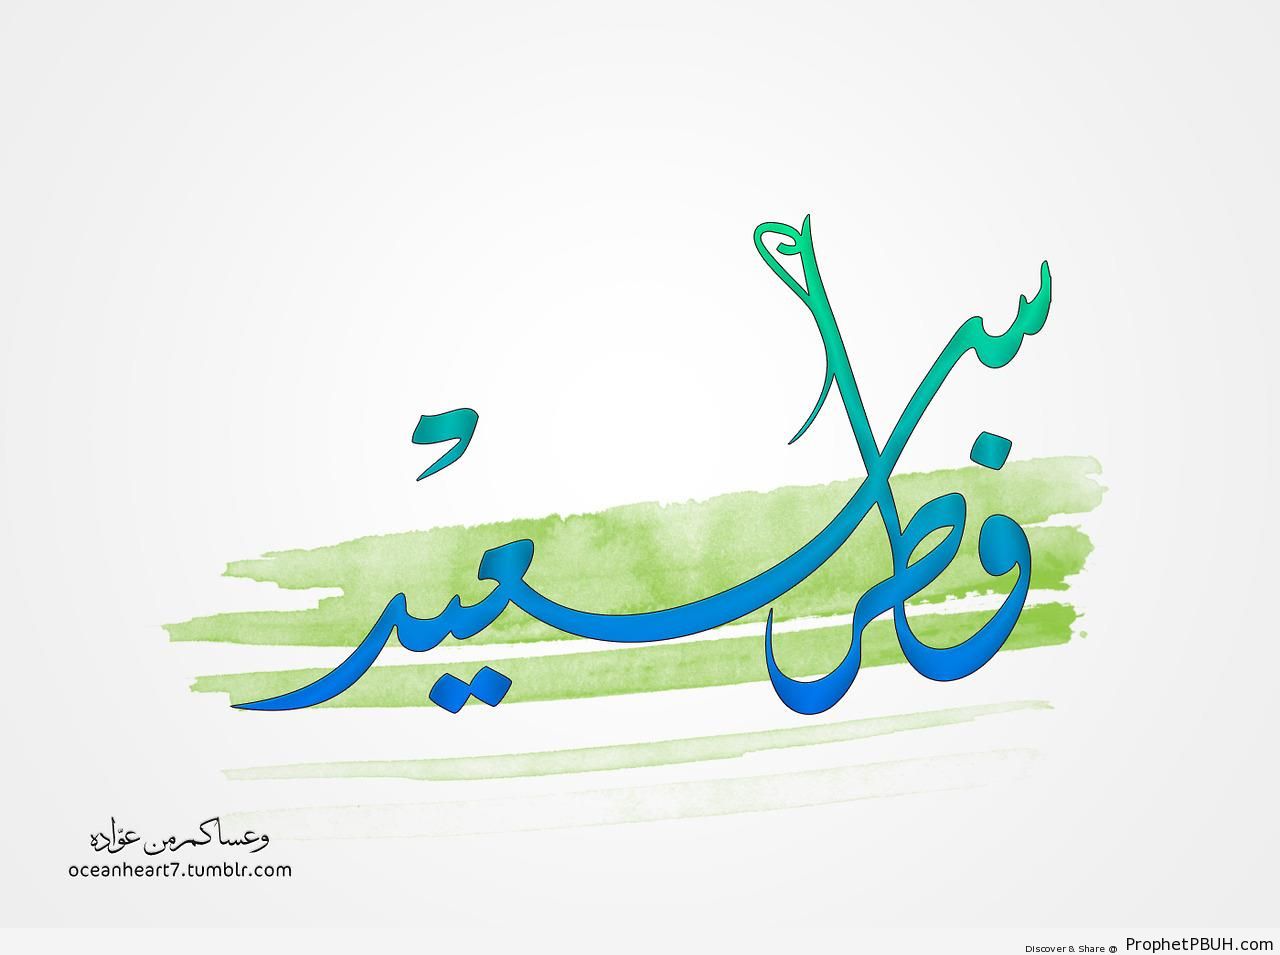 Eid al-Fitr Wishes - Eid al-Fitr Greetings and Wishes (Cards, Posters, and Wallpapers) -